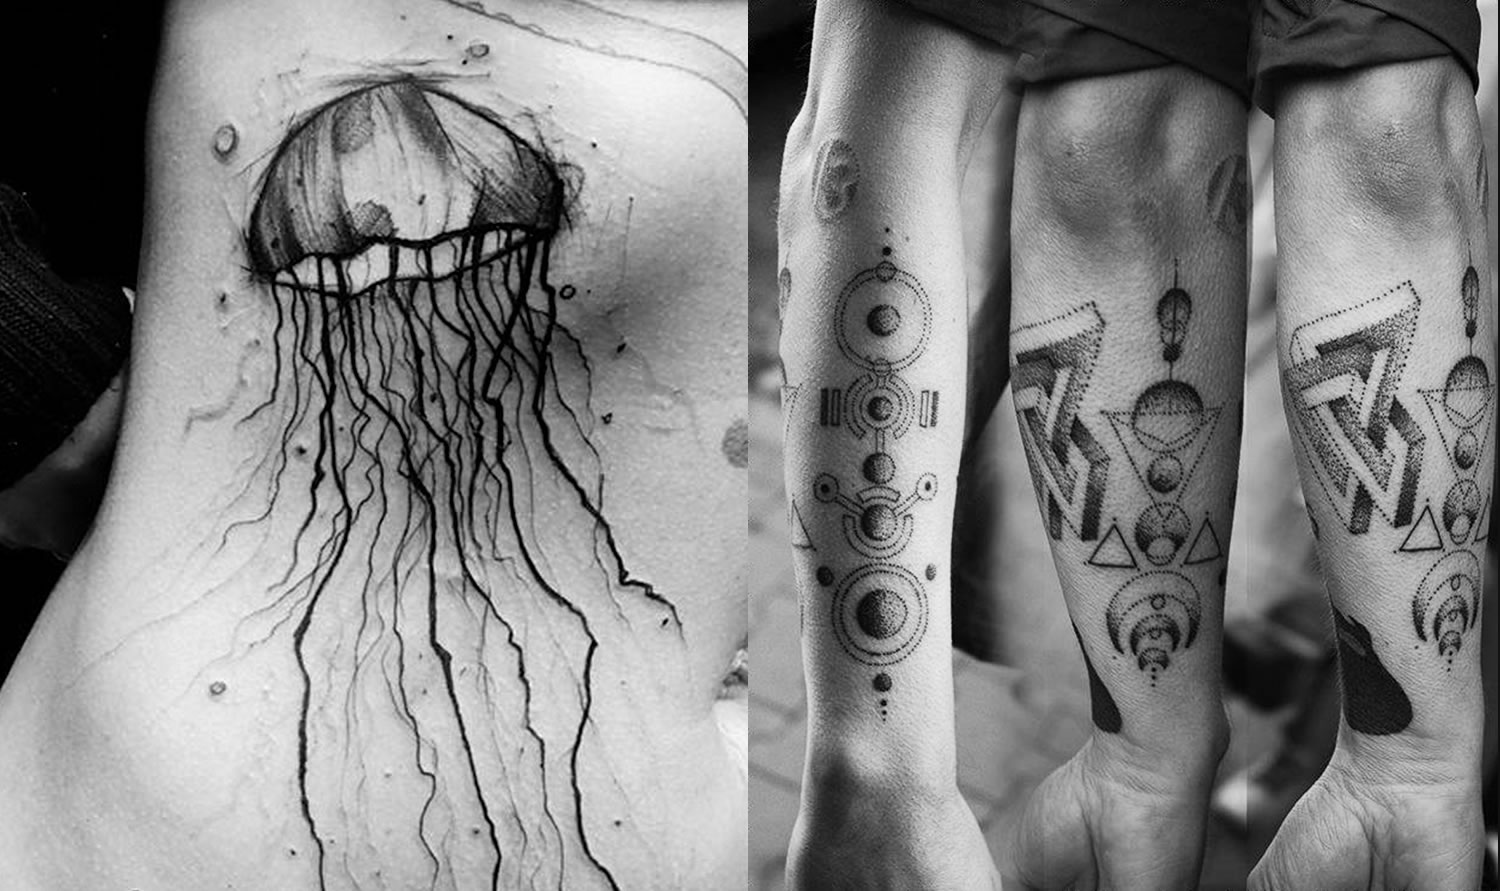 jelly fish and impossible object tattoos by Kamil Mokot